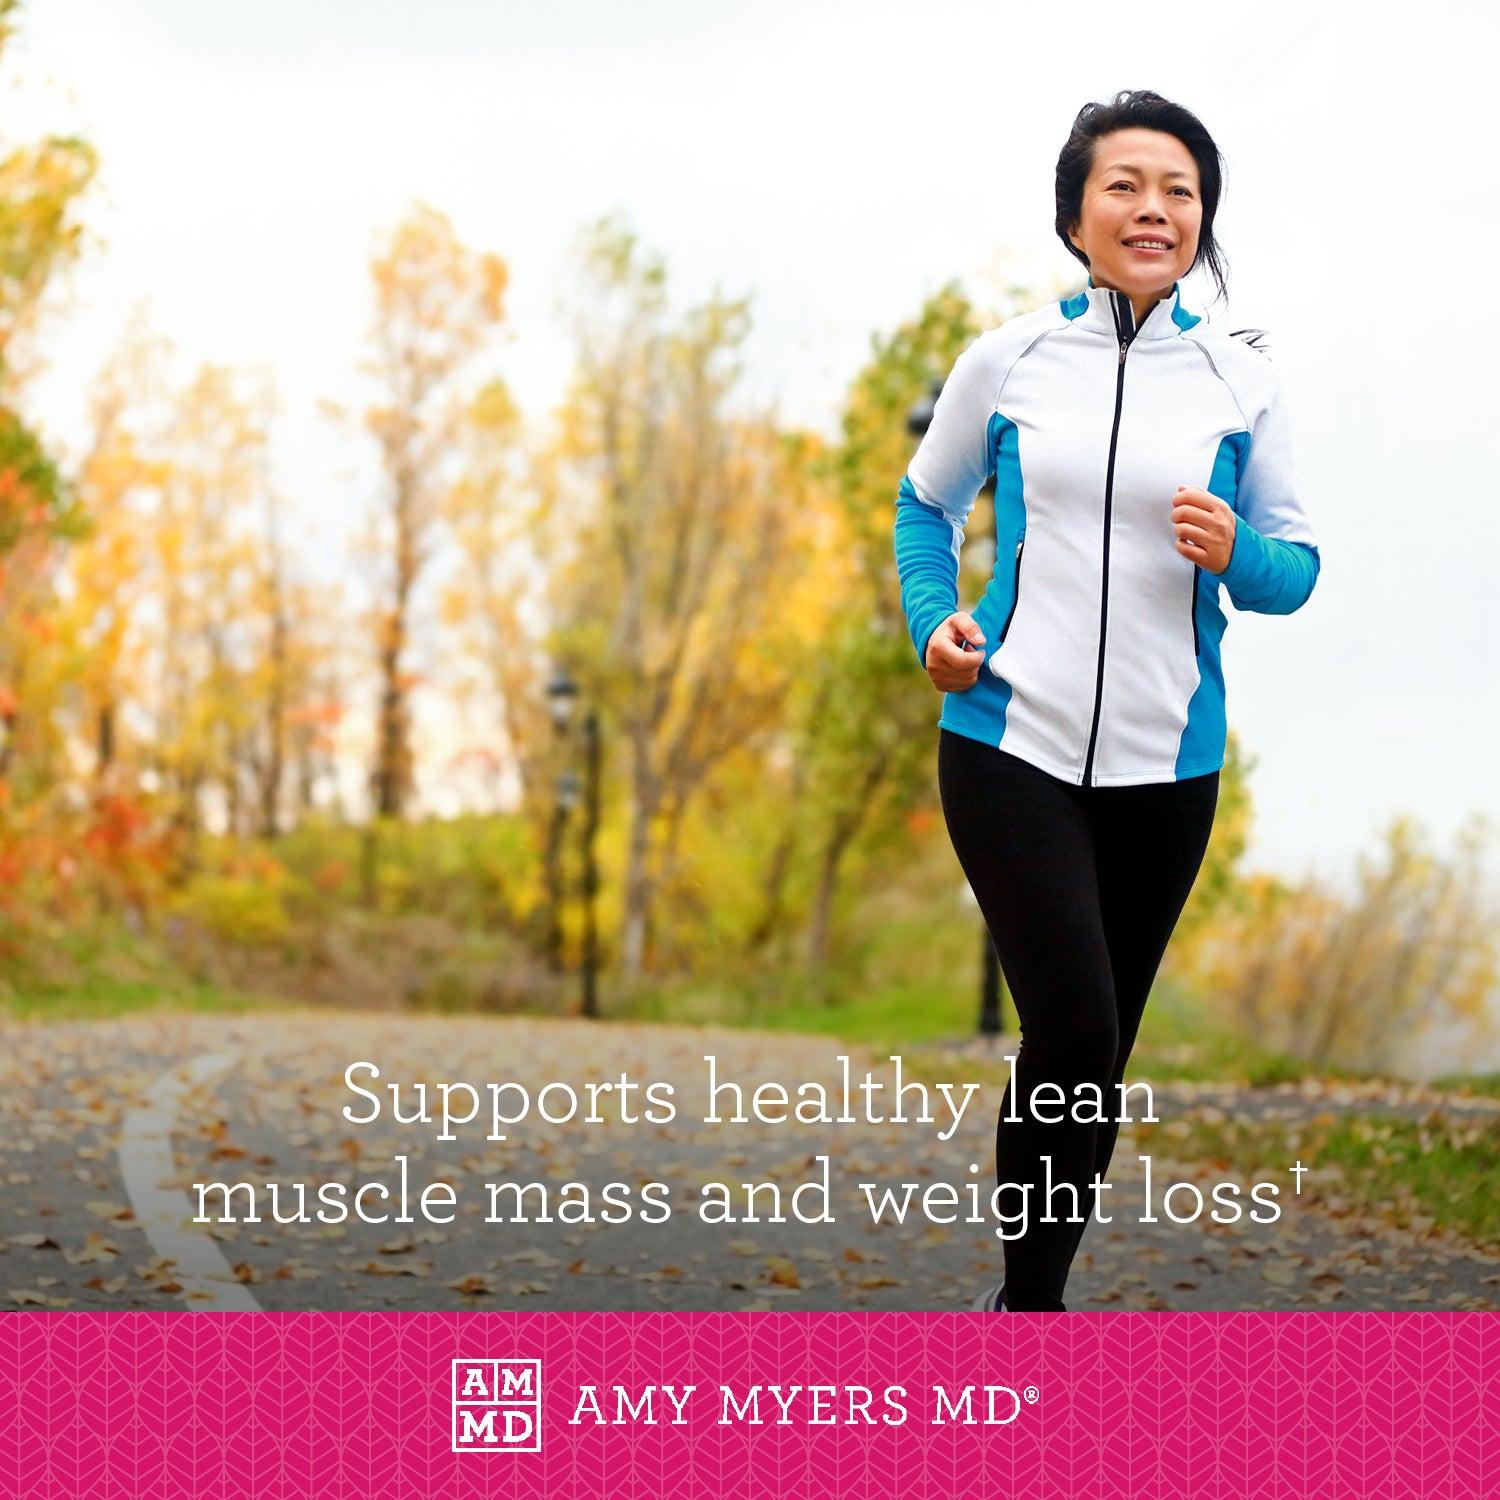 Powder Sampler Pack - A woman jogging - Supports healthy lean muscle mass and weight loss - Amy Myers MD